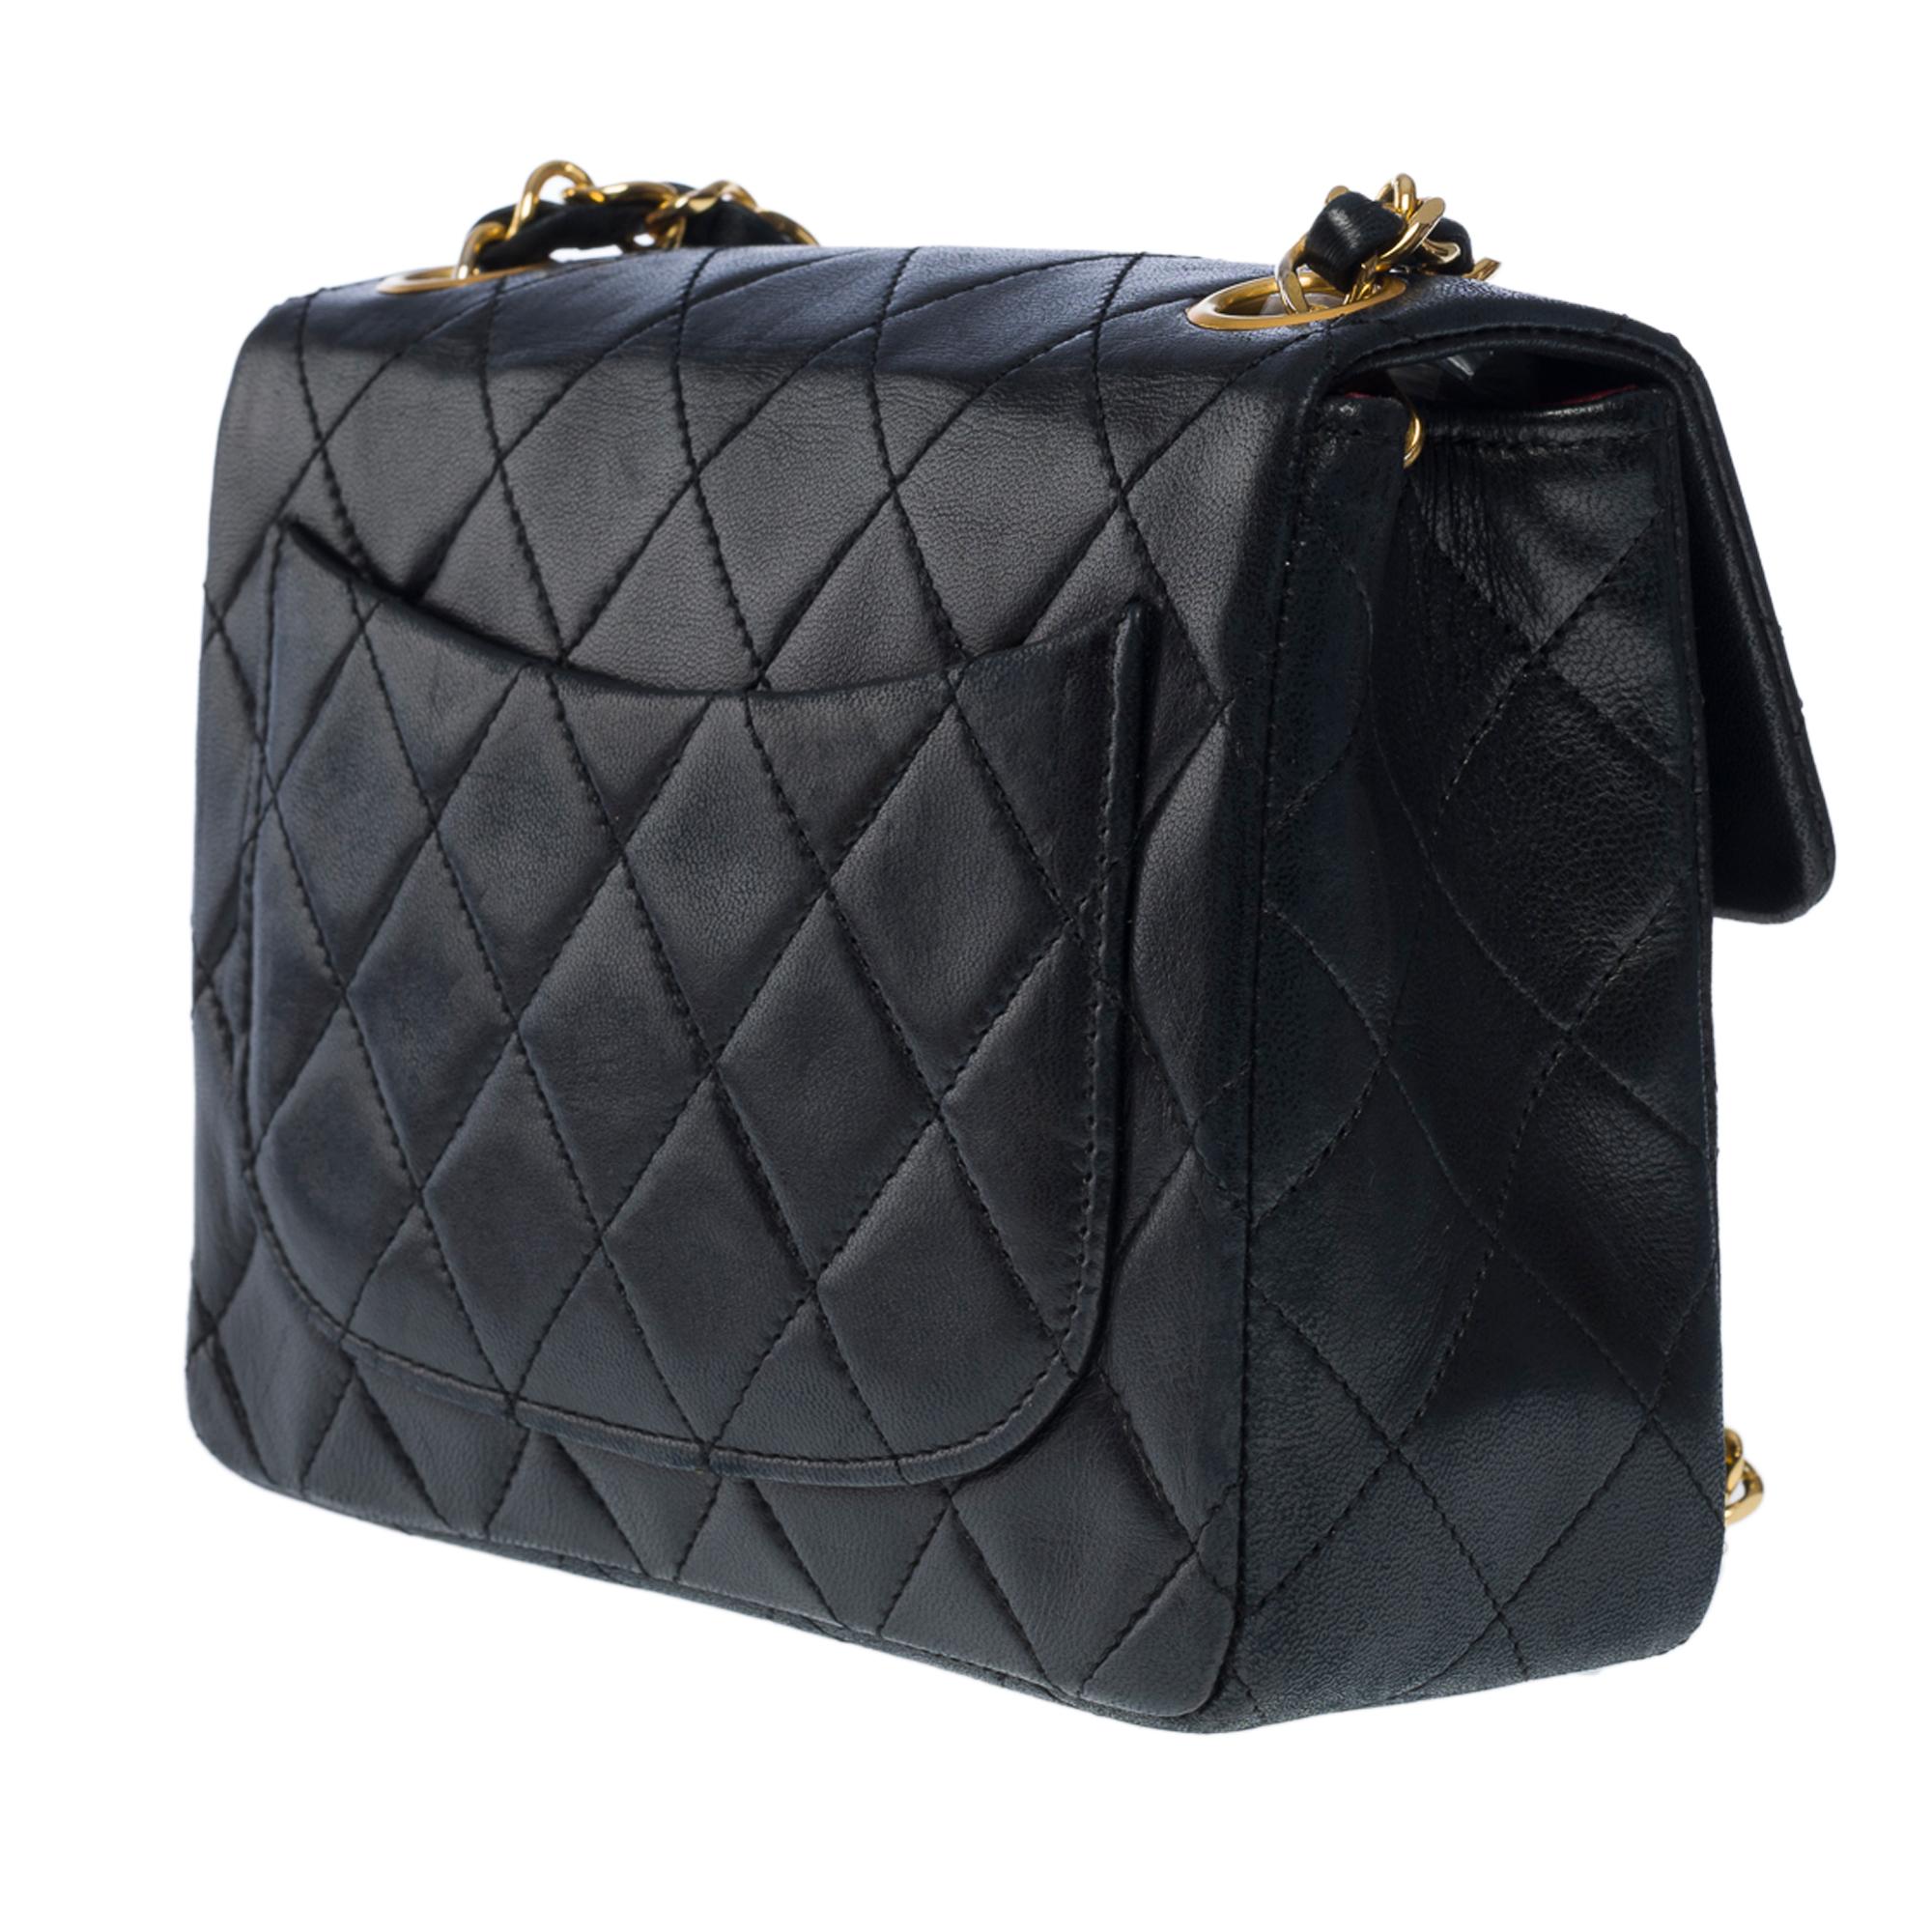 Women's Chanel Timeless Mini Square shoulder Flap bag in black quilted lambskin, GHW